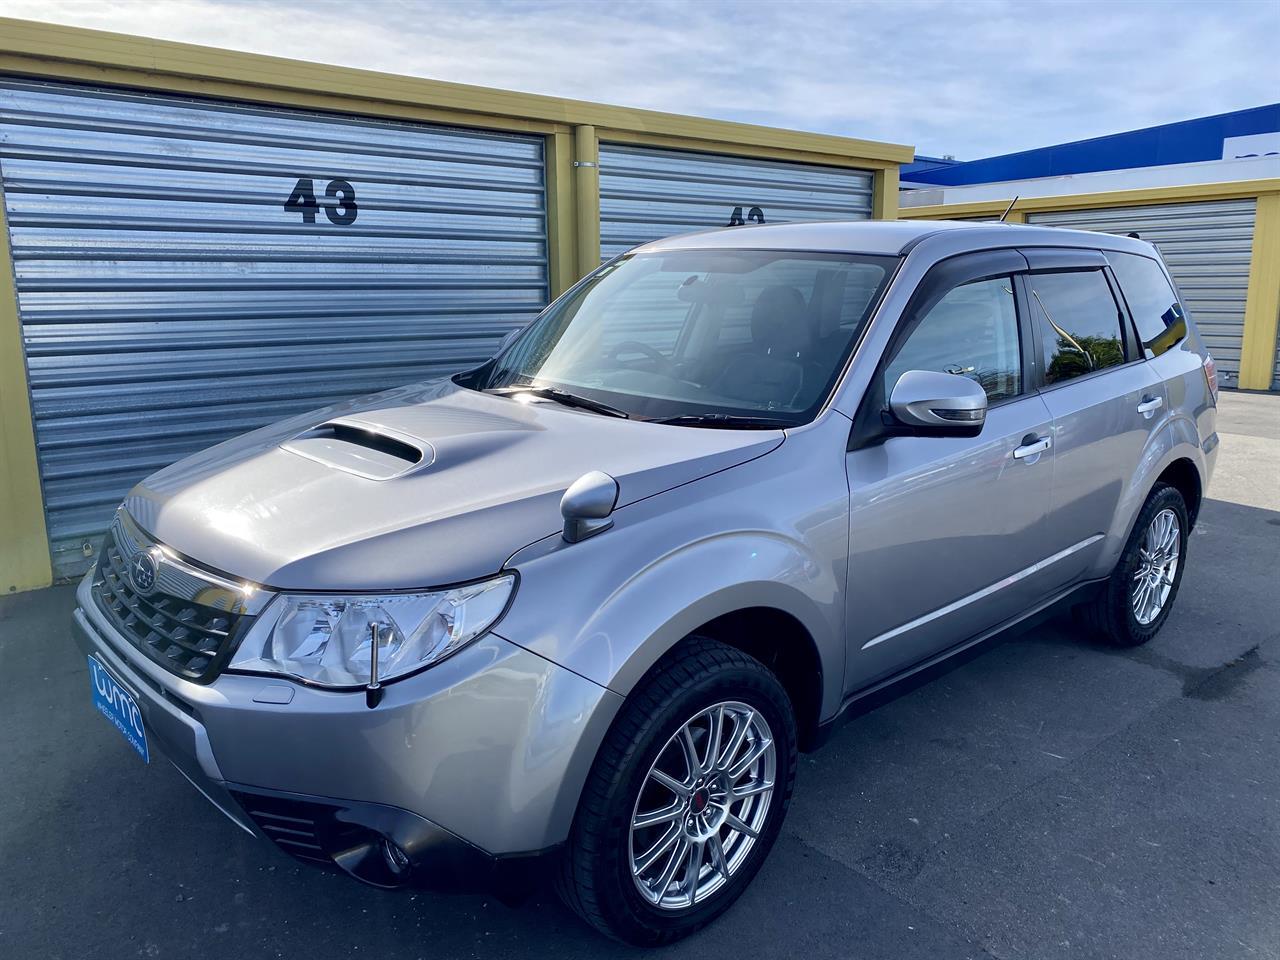 2010 Subaru Forester 2.5lt Turbo XT SEdition 4WD for sale